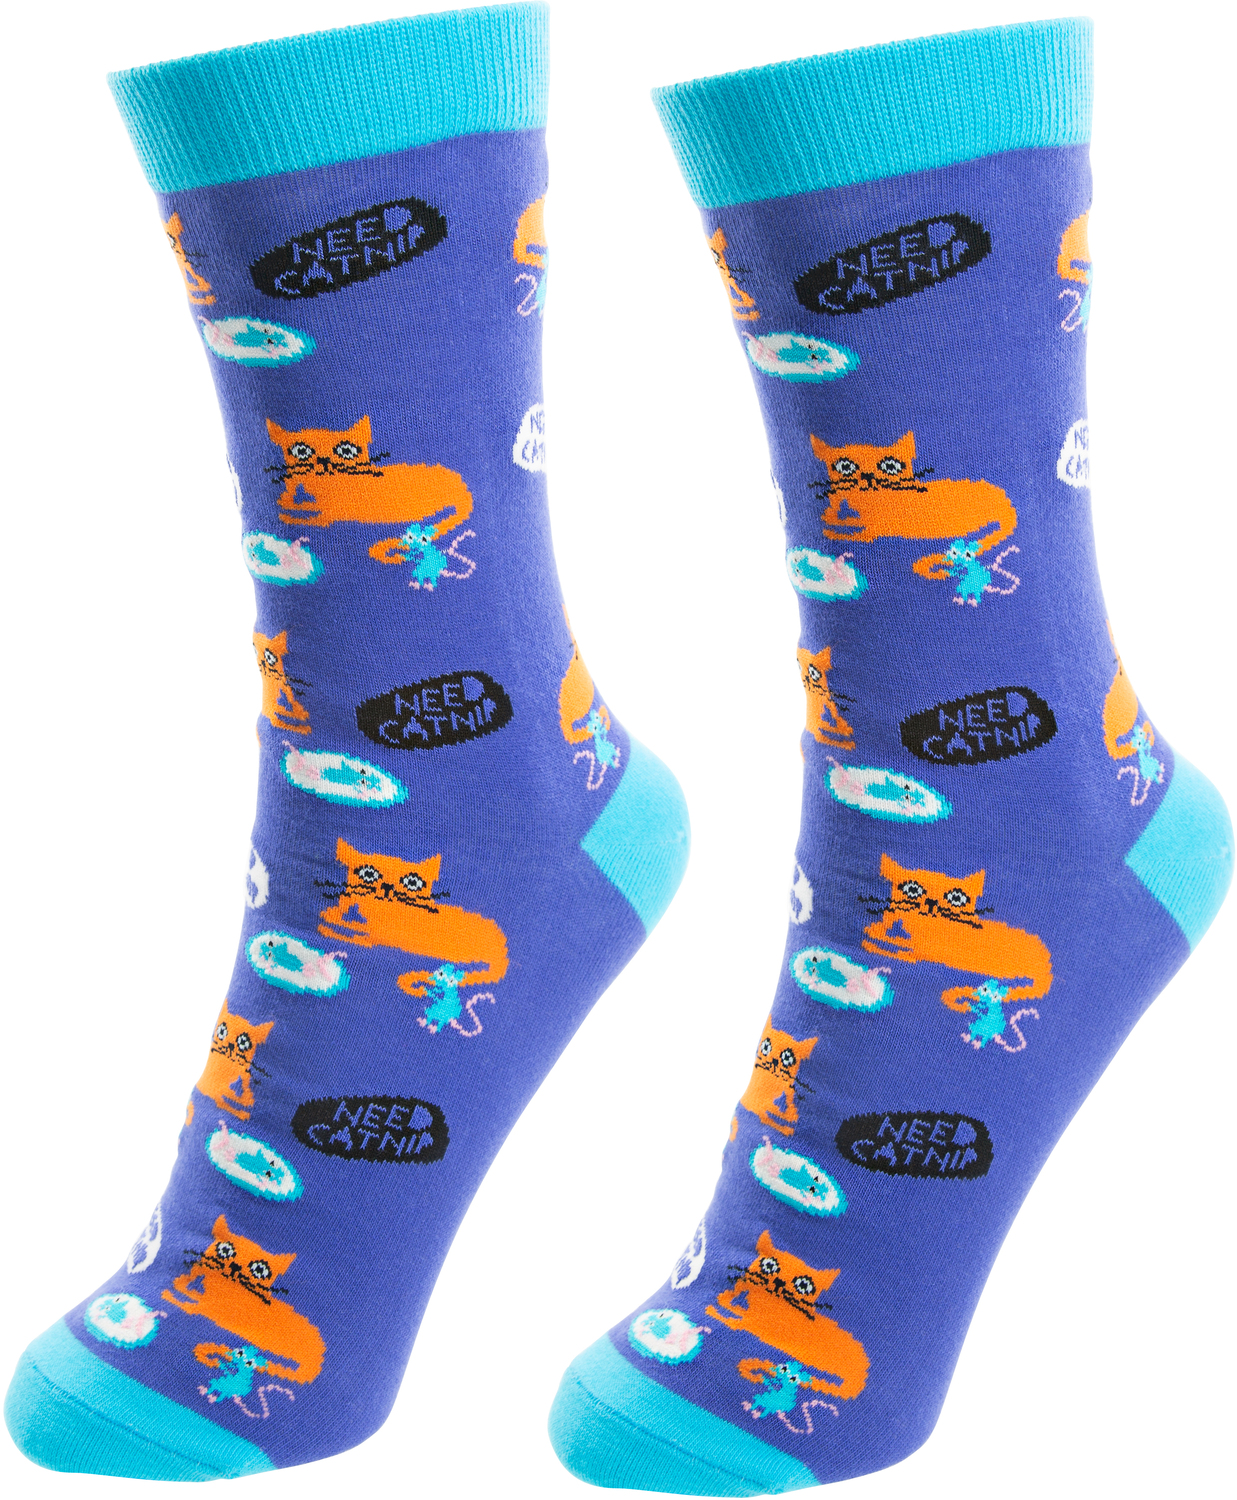 Not Meow-tivated by Fugly Friends - Not Meow-tivated - S/M Unisex Cotton Blend Sock